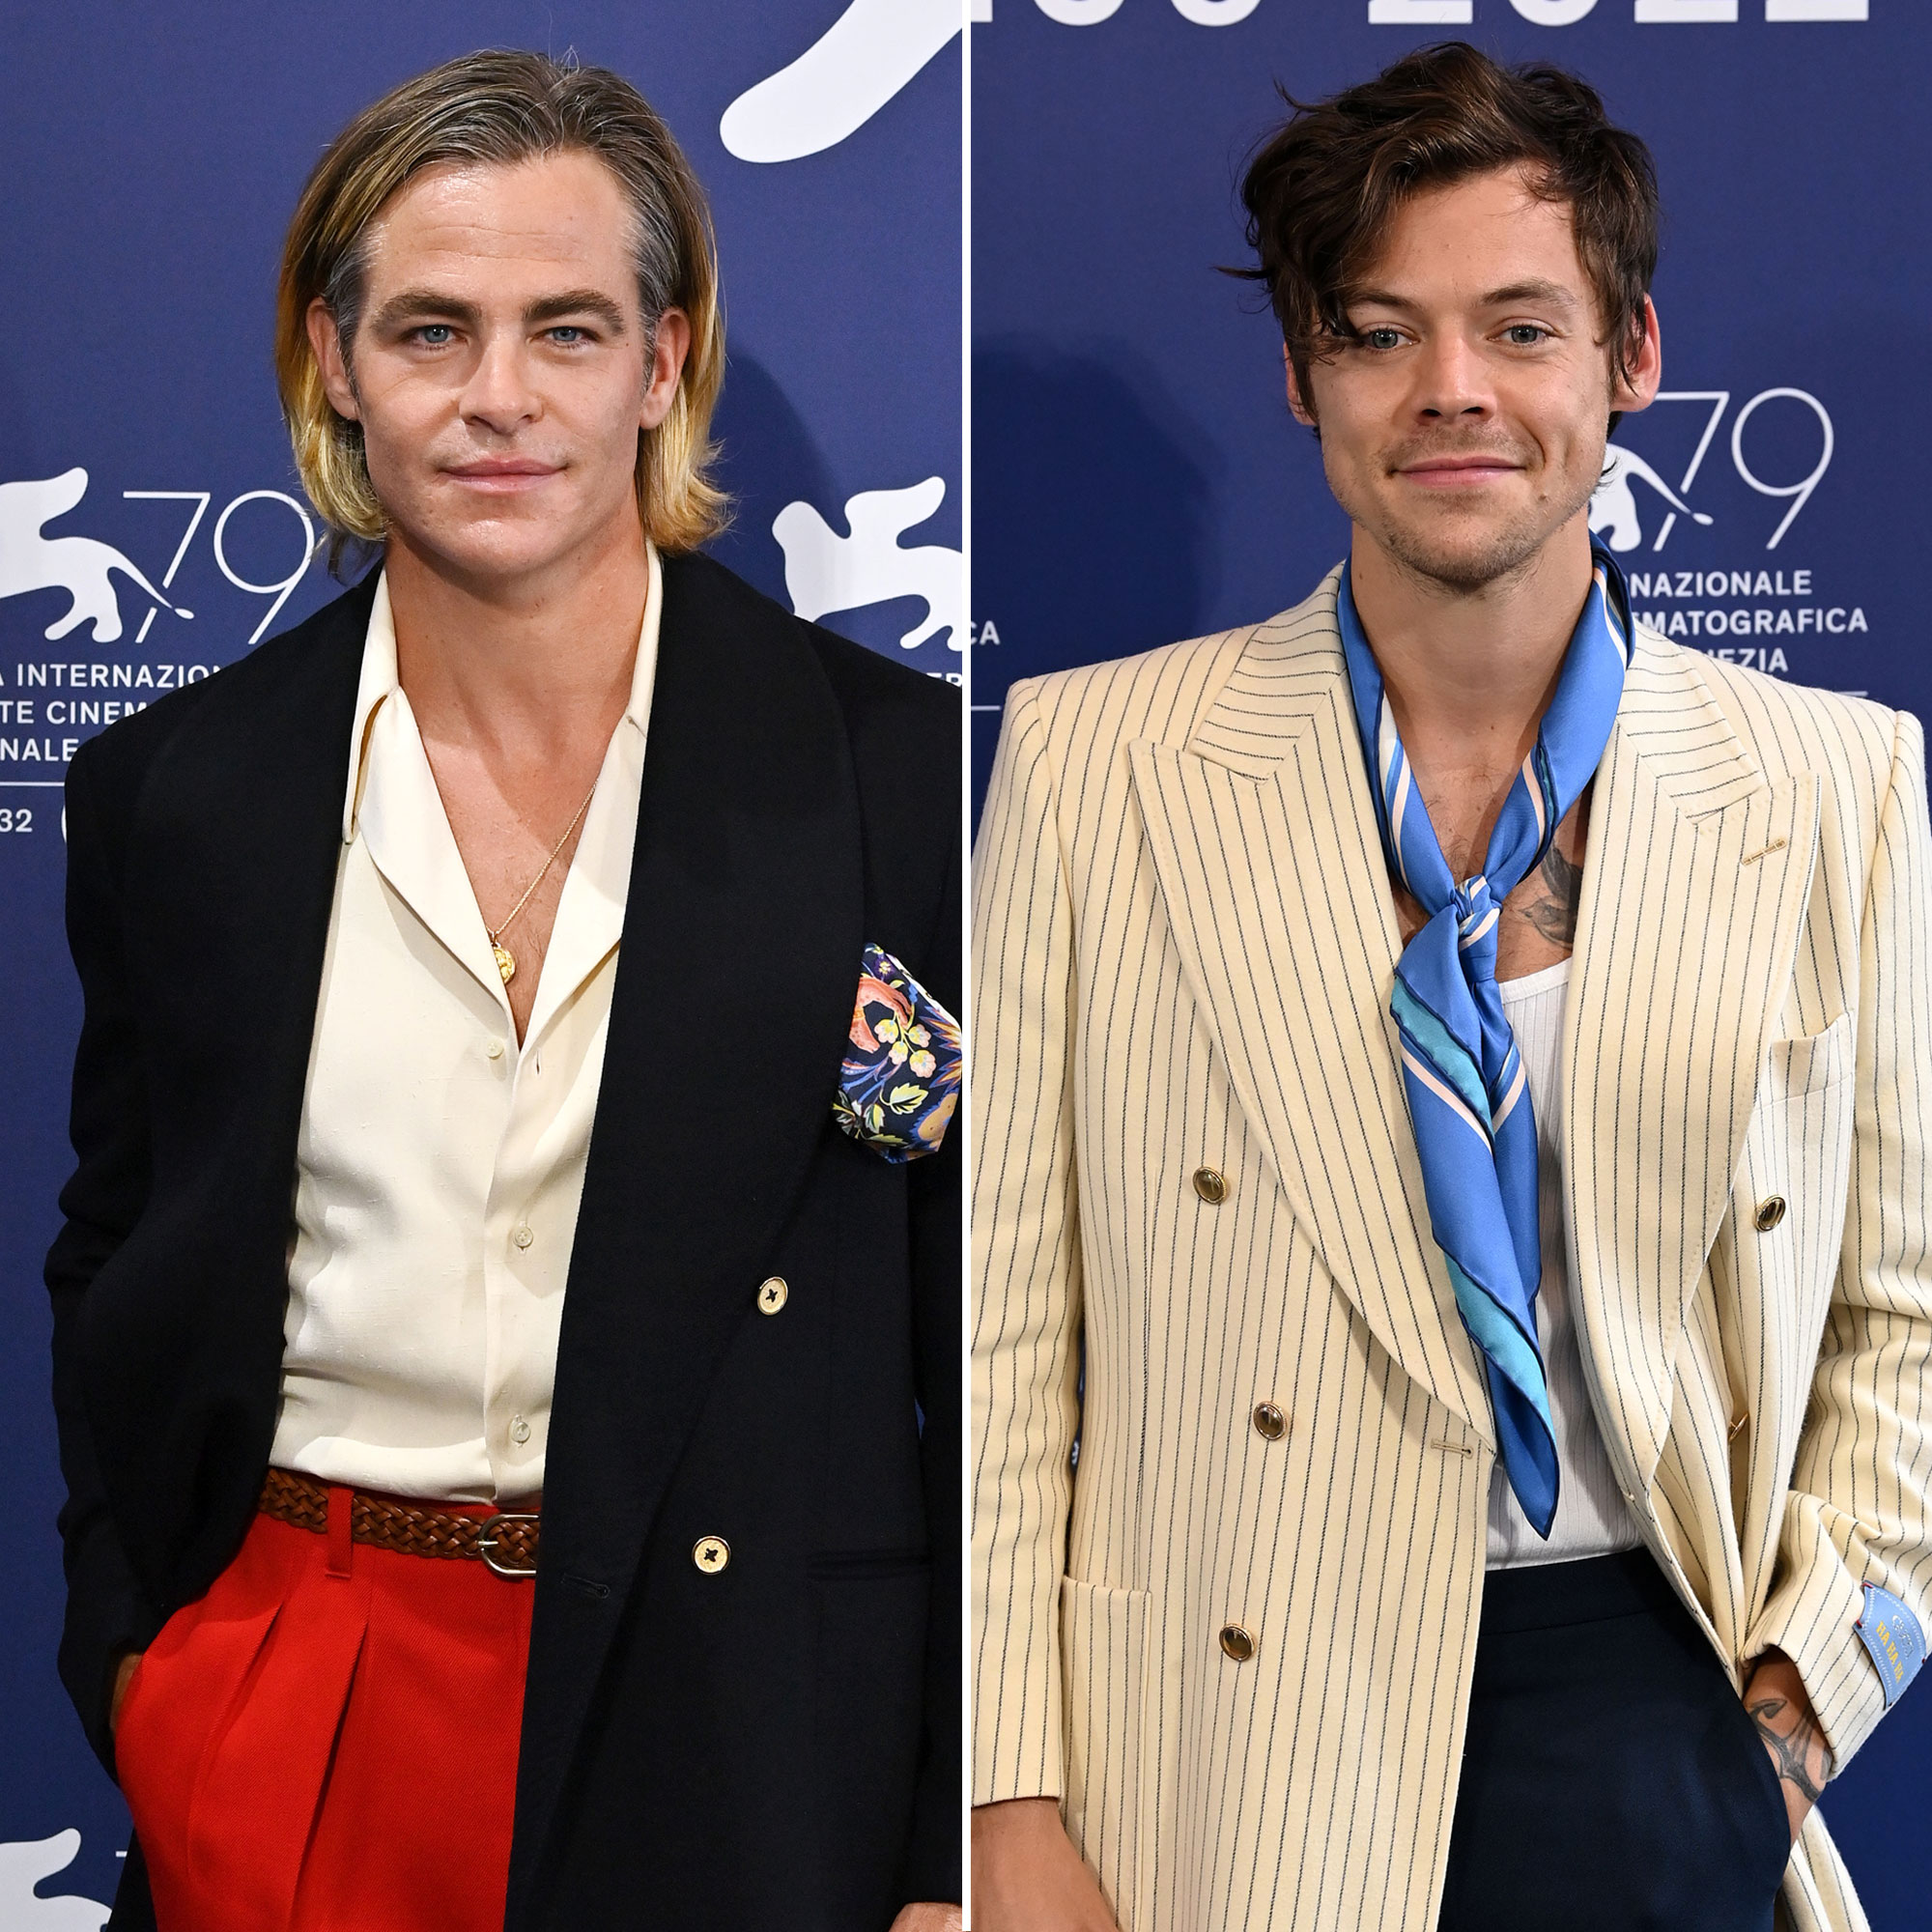 Harry Styles Didn't Spit on Chris Pine, Rep Says